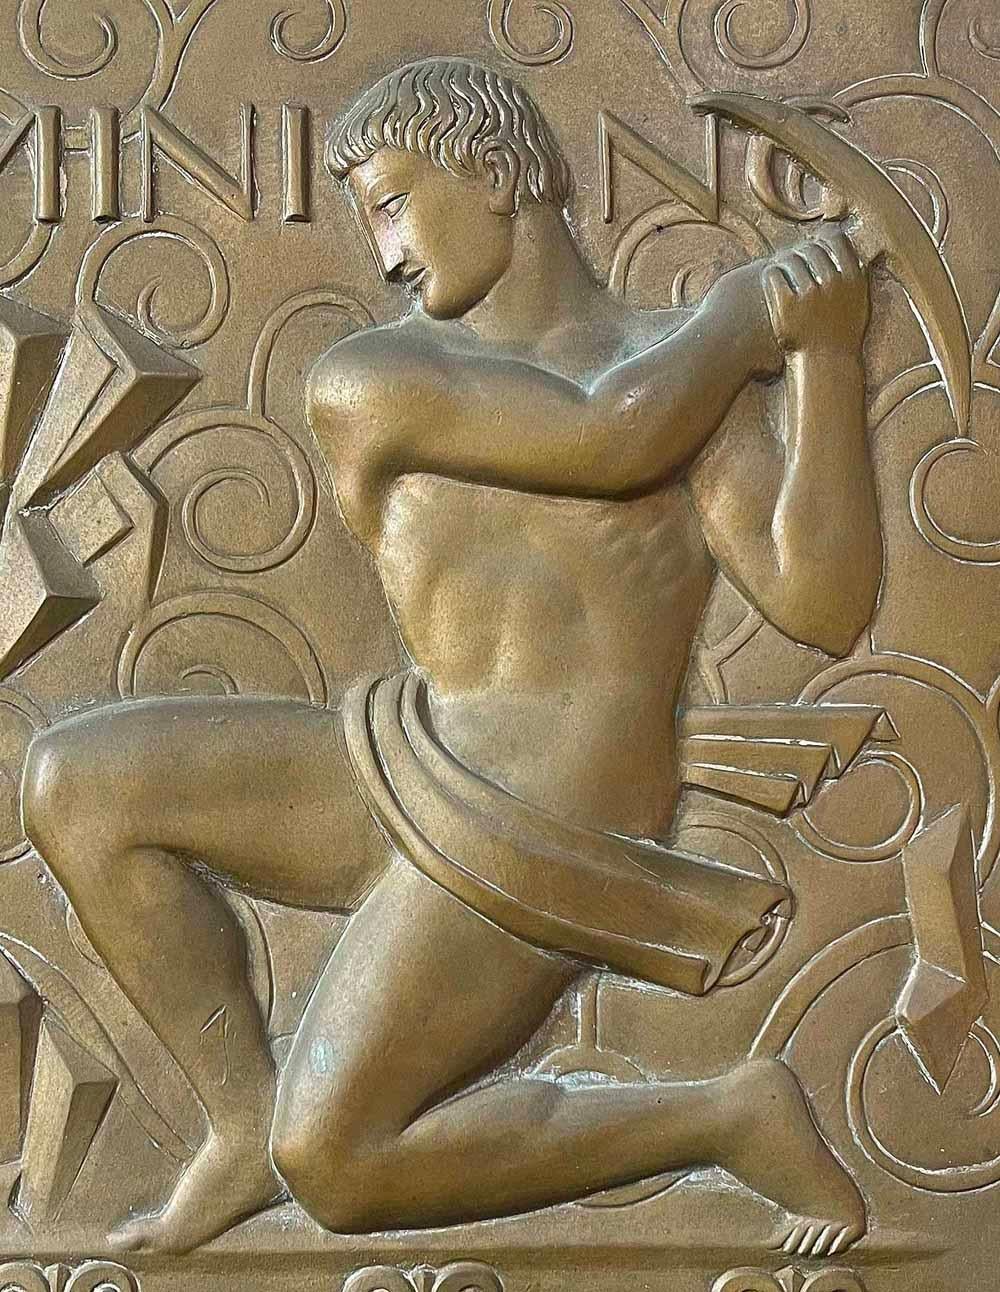 An extraordinary piece of American history and high style Art Deco design, this cast bronze panel depicting a stylized nude miner with pickaxe ready to strike, was designed by Géza Maróti for the lobby of the renowned Fisher Building in Detroit. 